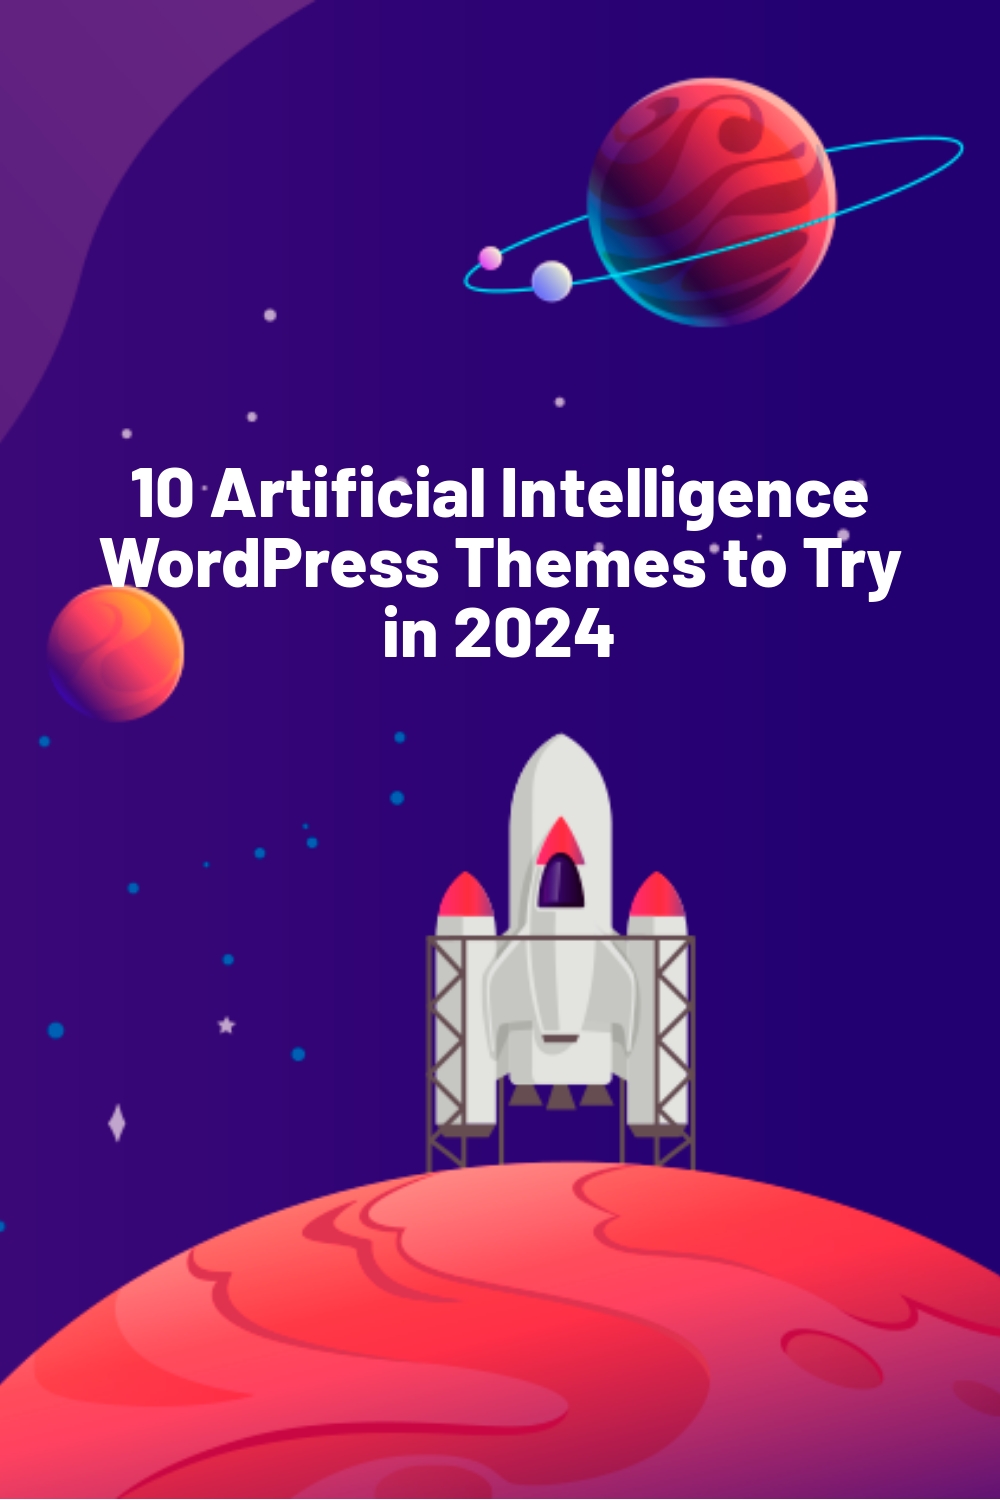 10 Artificial Intelligence WordPress Themes to Try in 2024